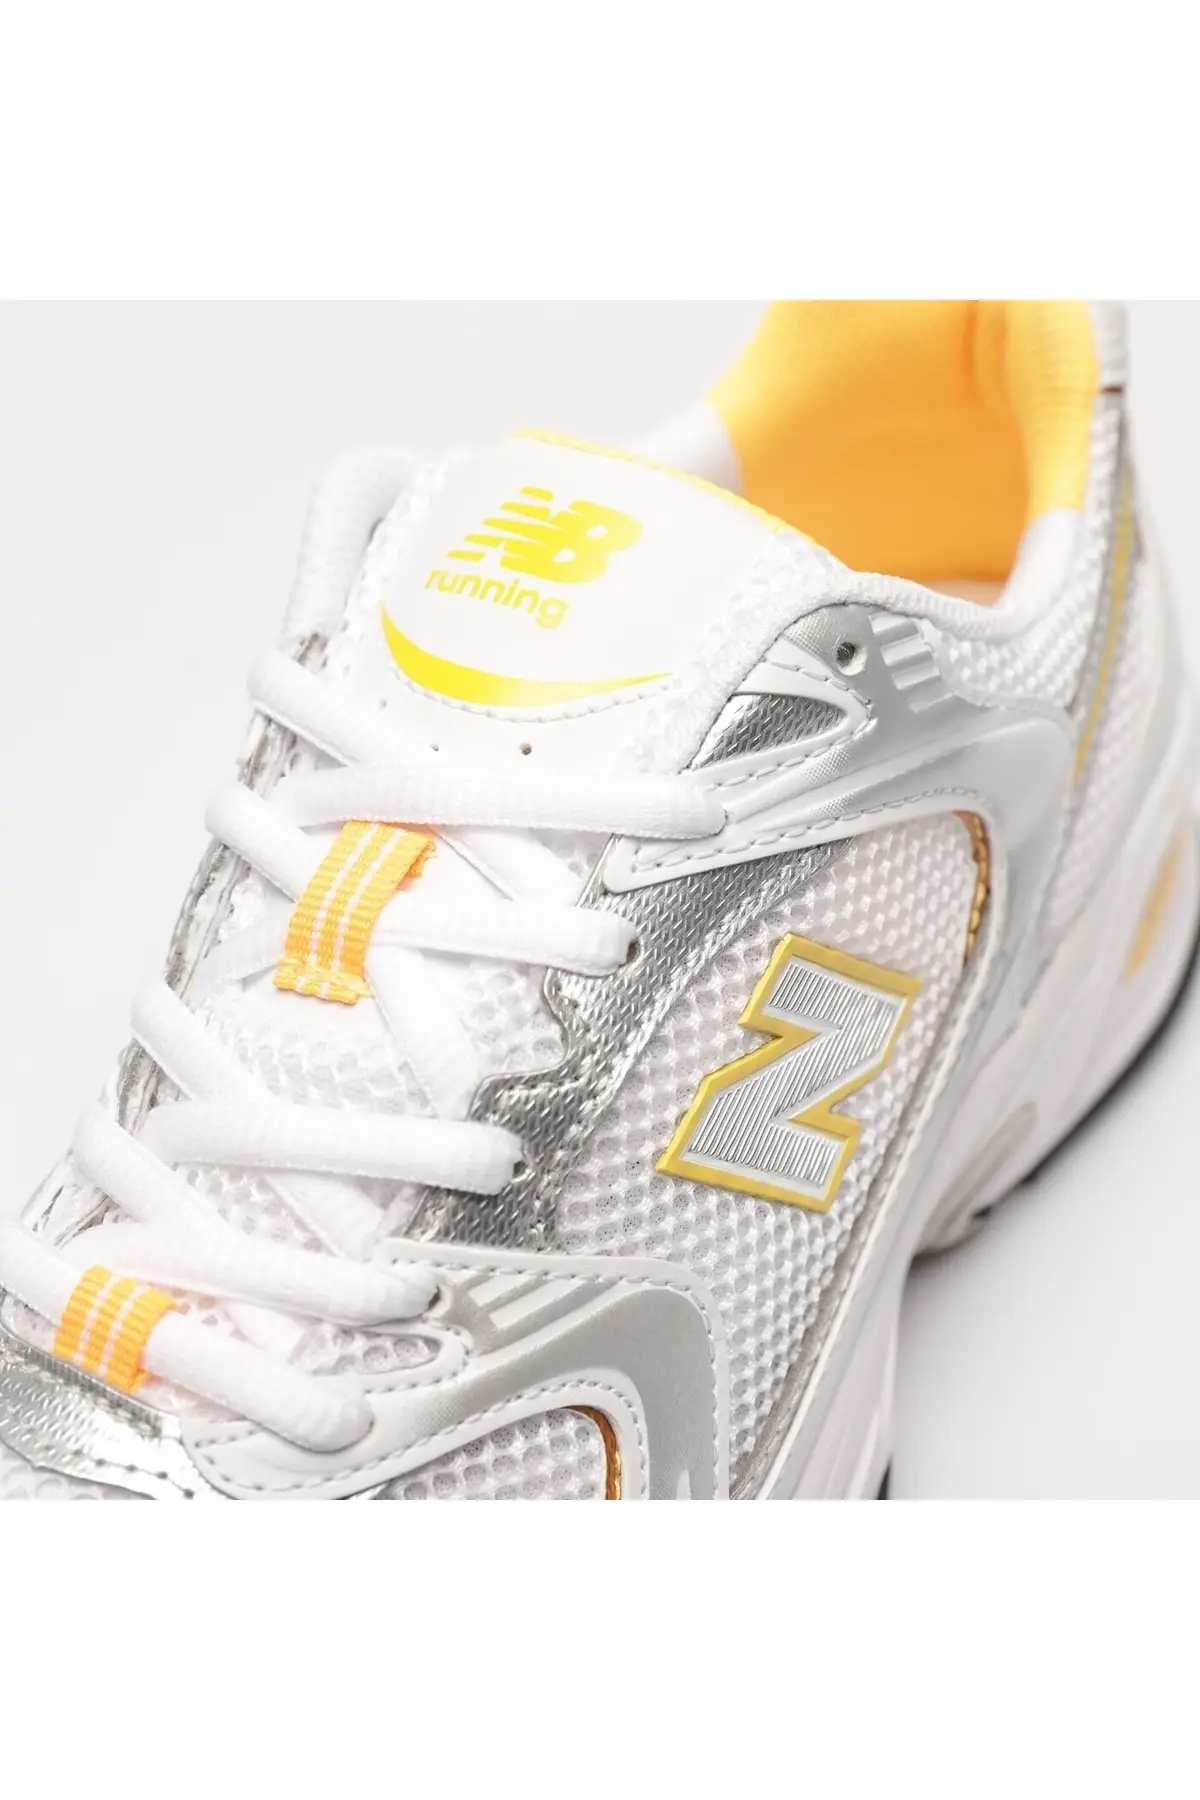 Ultimate Guide to New Balance Women’s 574 Core Shoes插图4